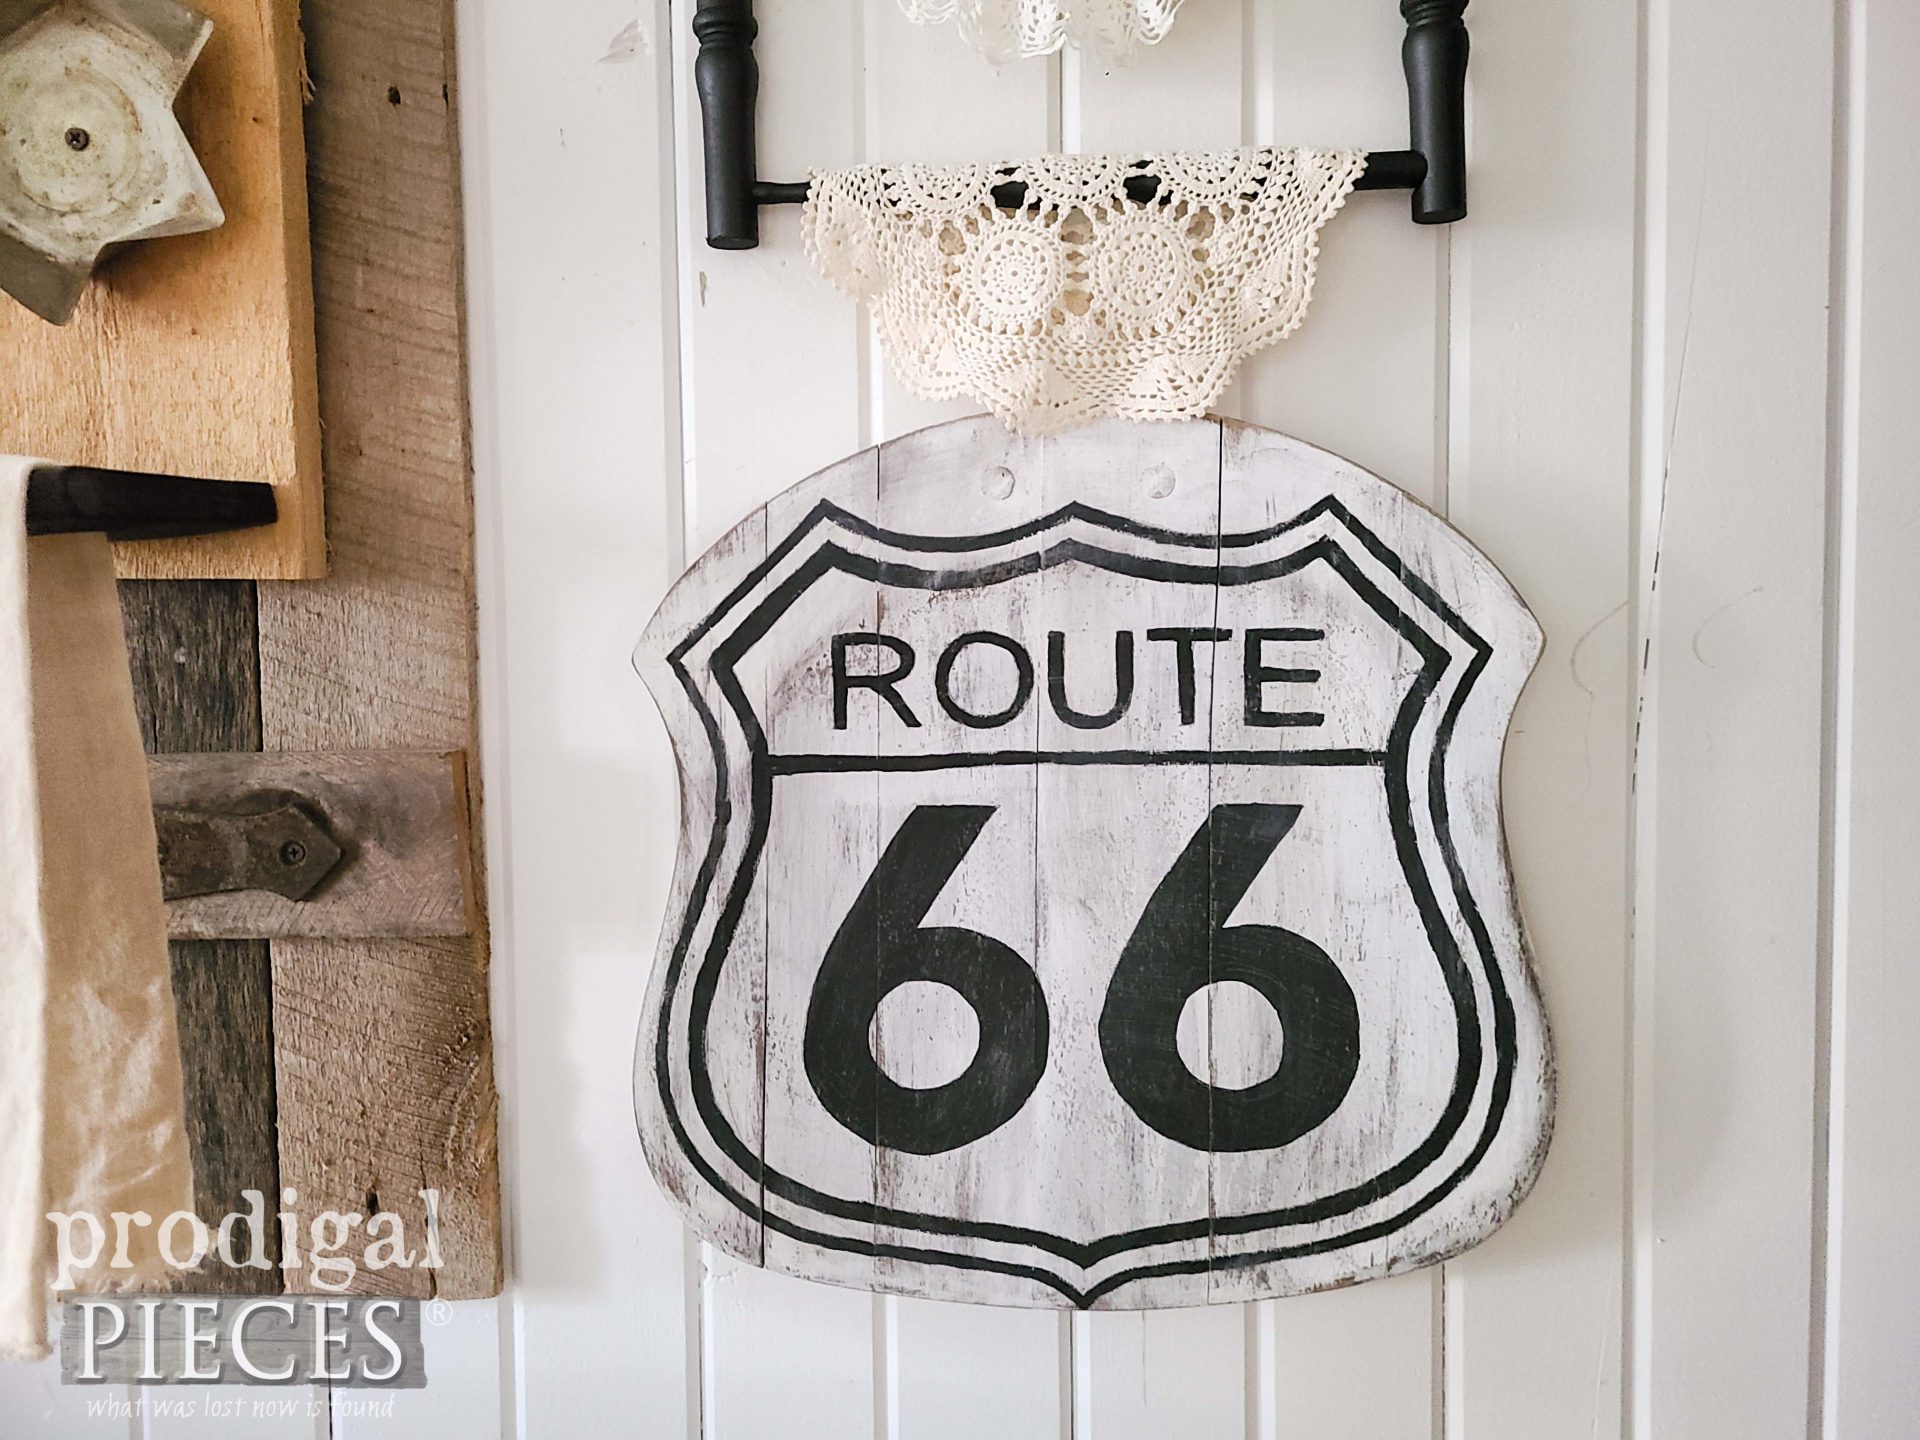 Upcycled Broken Chair Seat into Route 66 Sign by Larissa of Prodigal Pieces | prodigalpieces.com #prodigalpieces #farmhouse #home #upcycled #sign